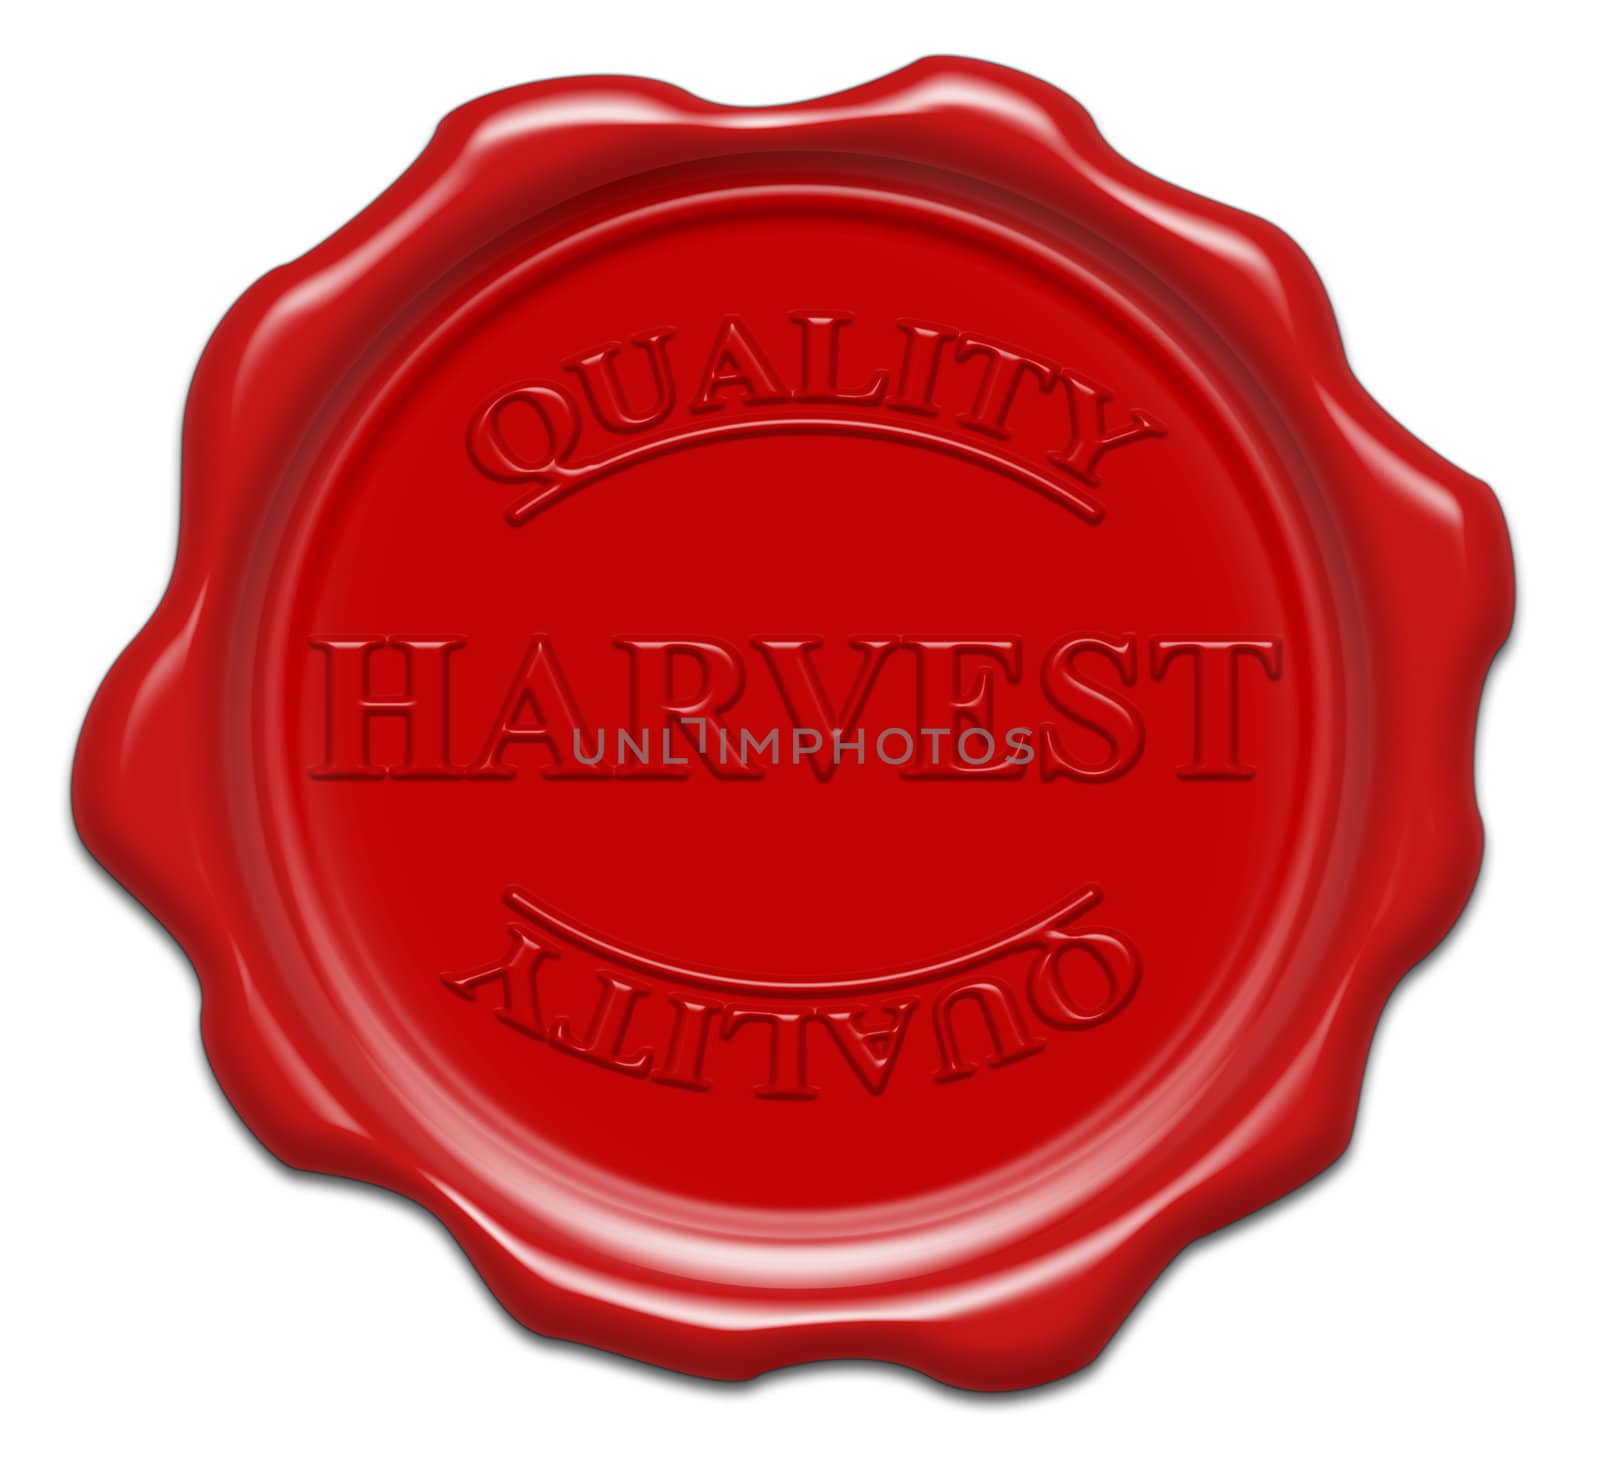 quality harvest - illustration red wax seal isolated on white ba by mozzyb